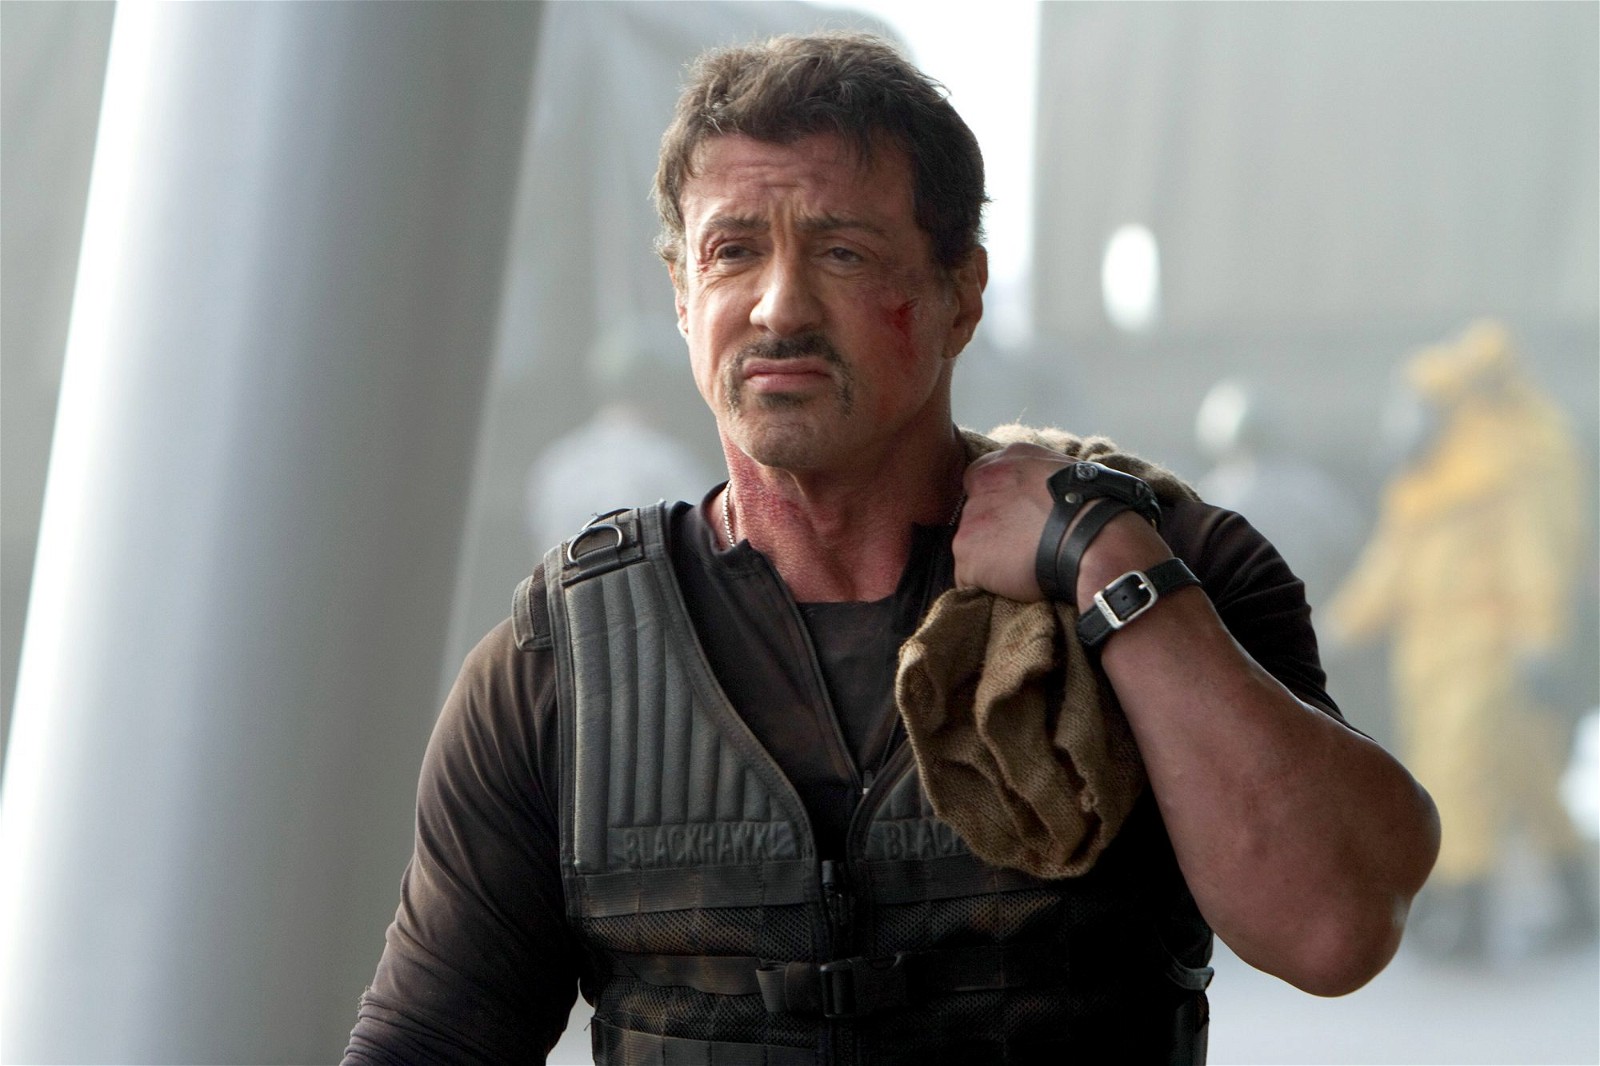 Sylvester Stallone in The Expendables franchise.